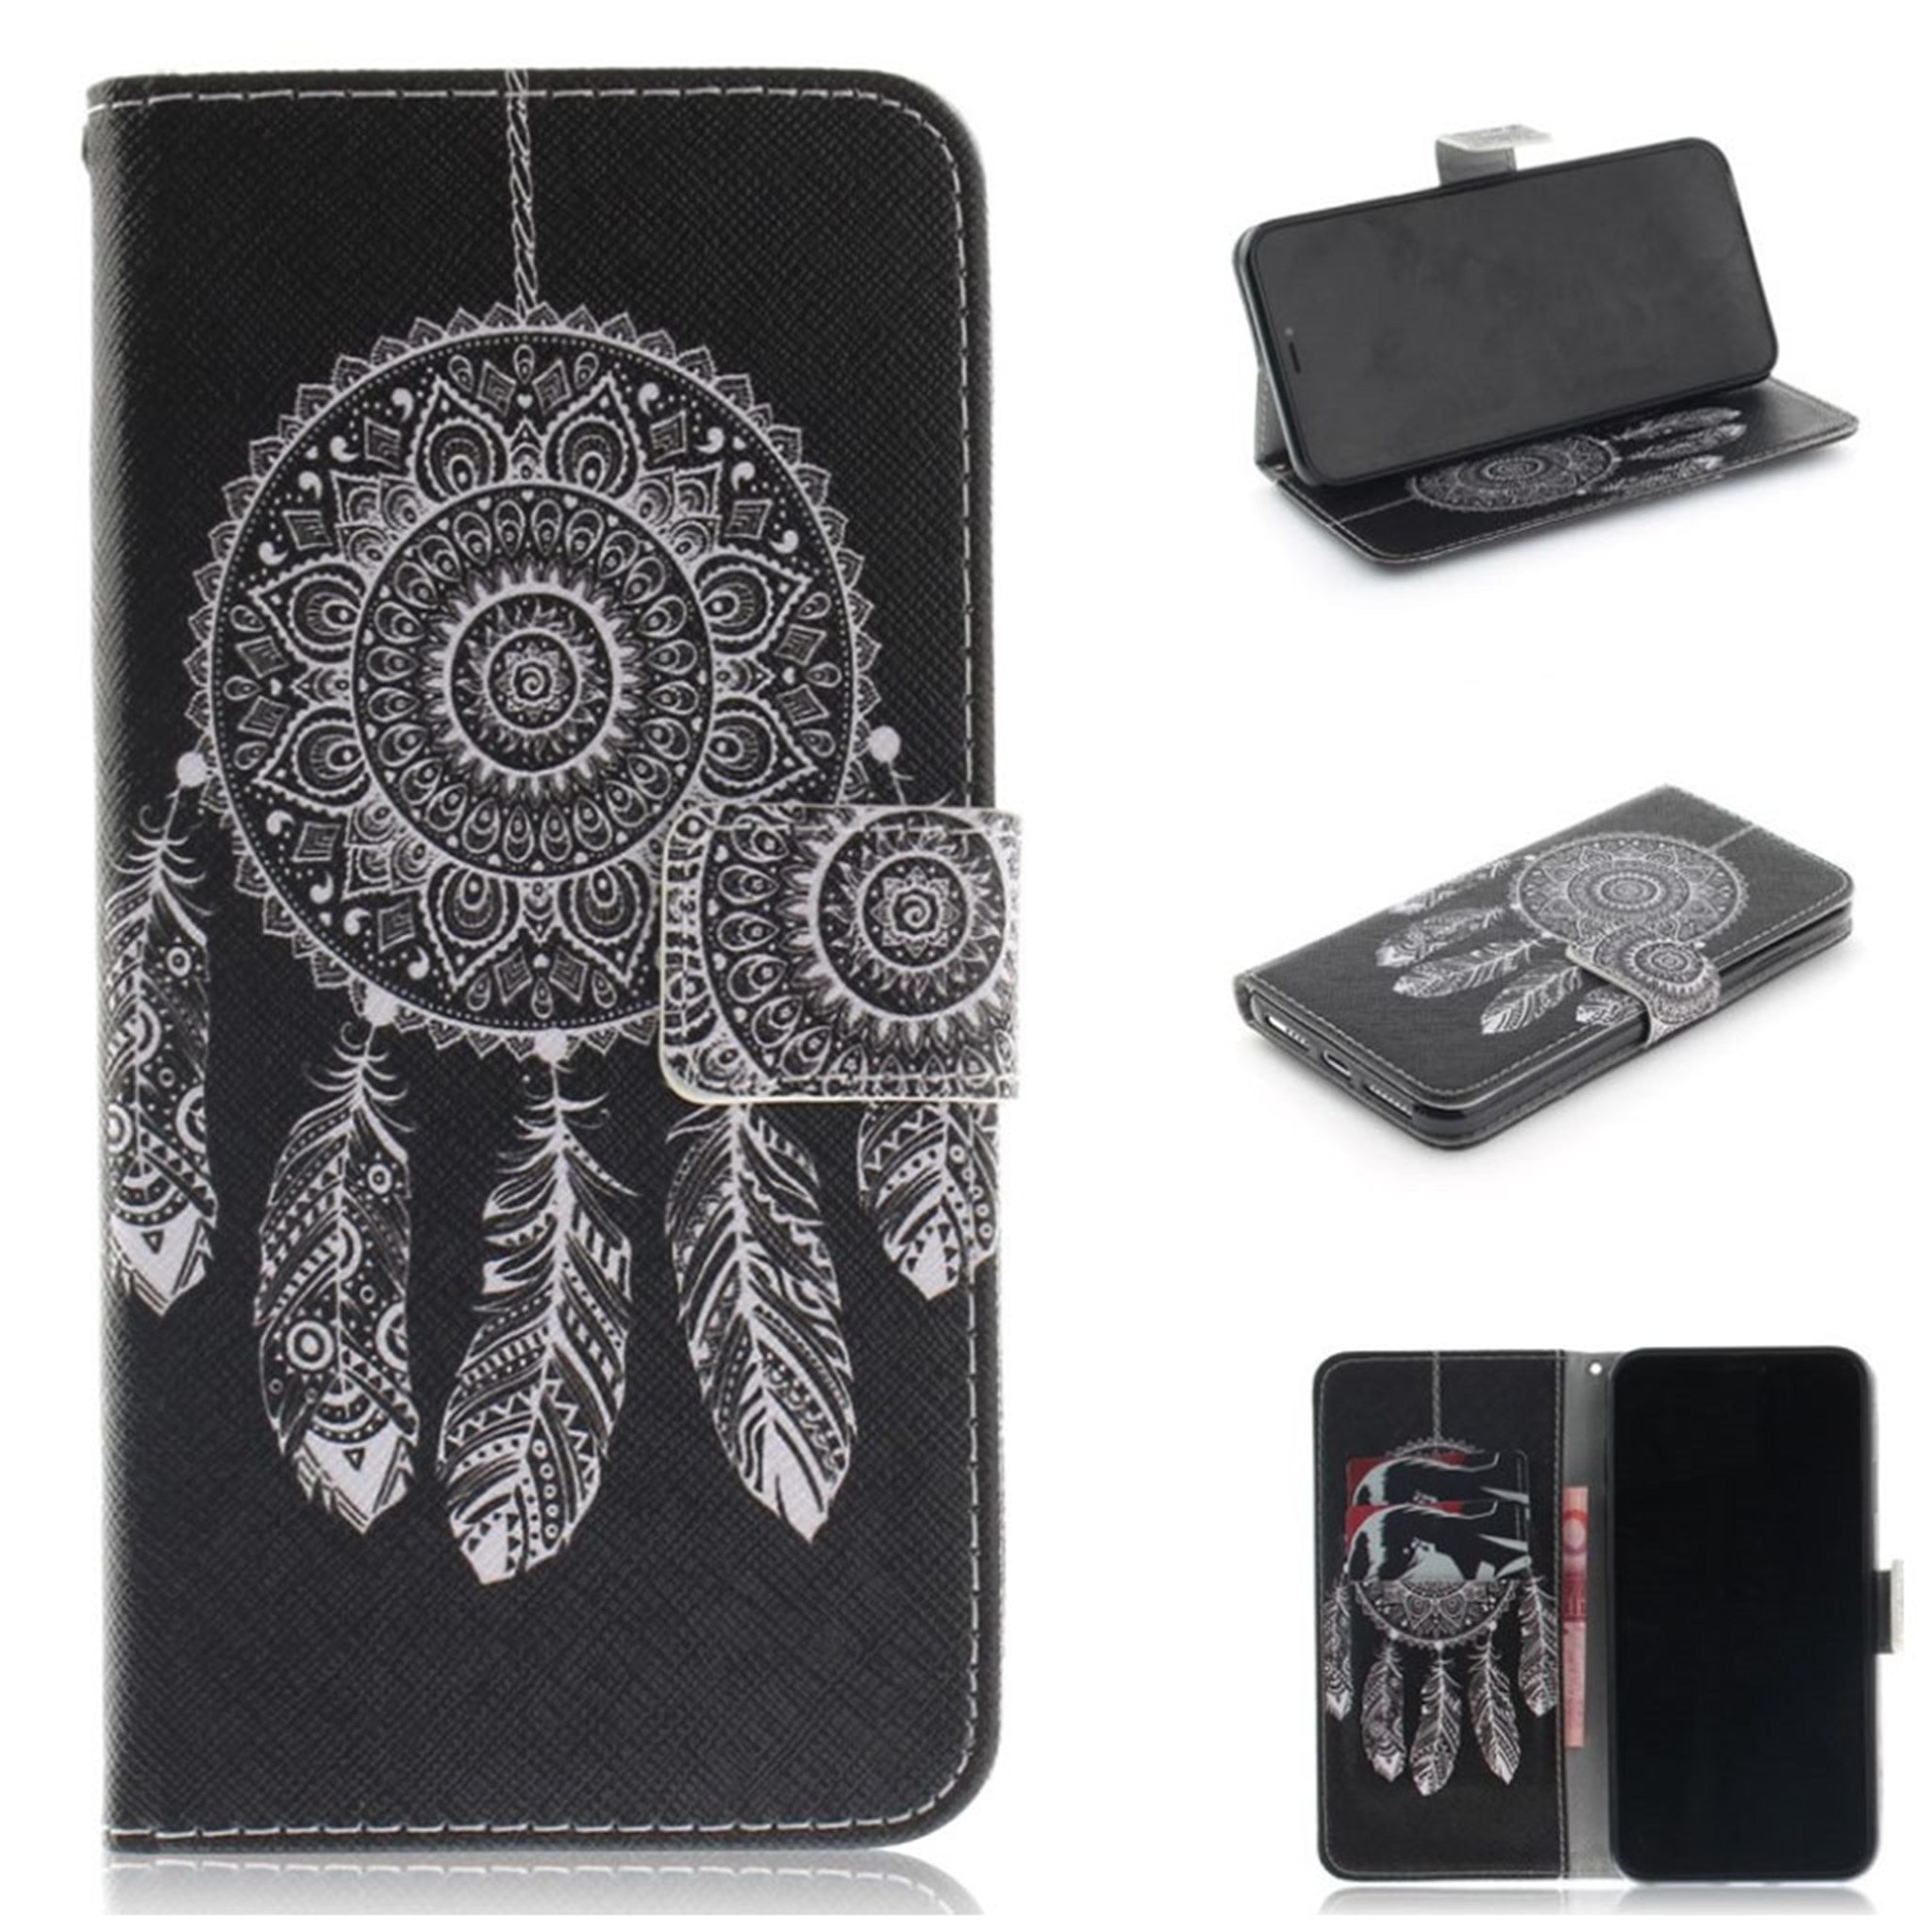 iPhone Xs Max patterned leather flip case - Tribal Dream Catcher